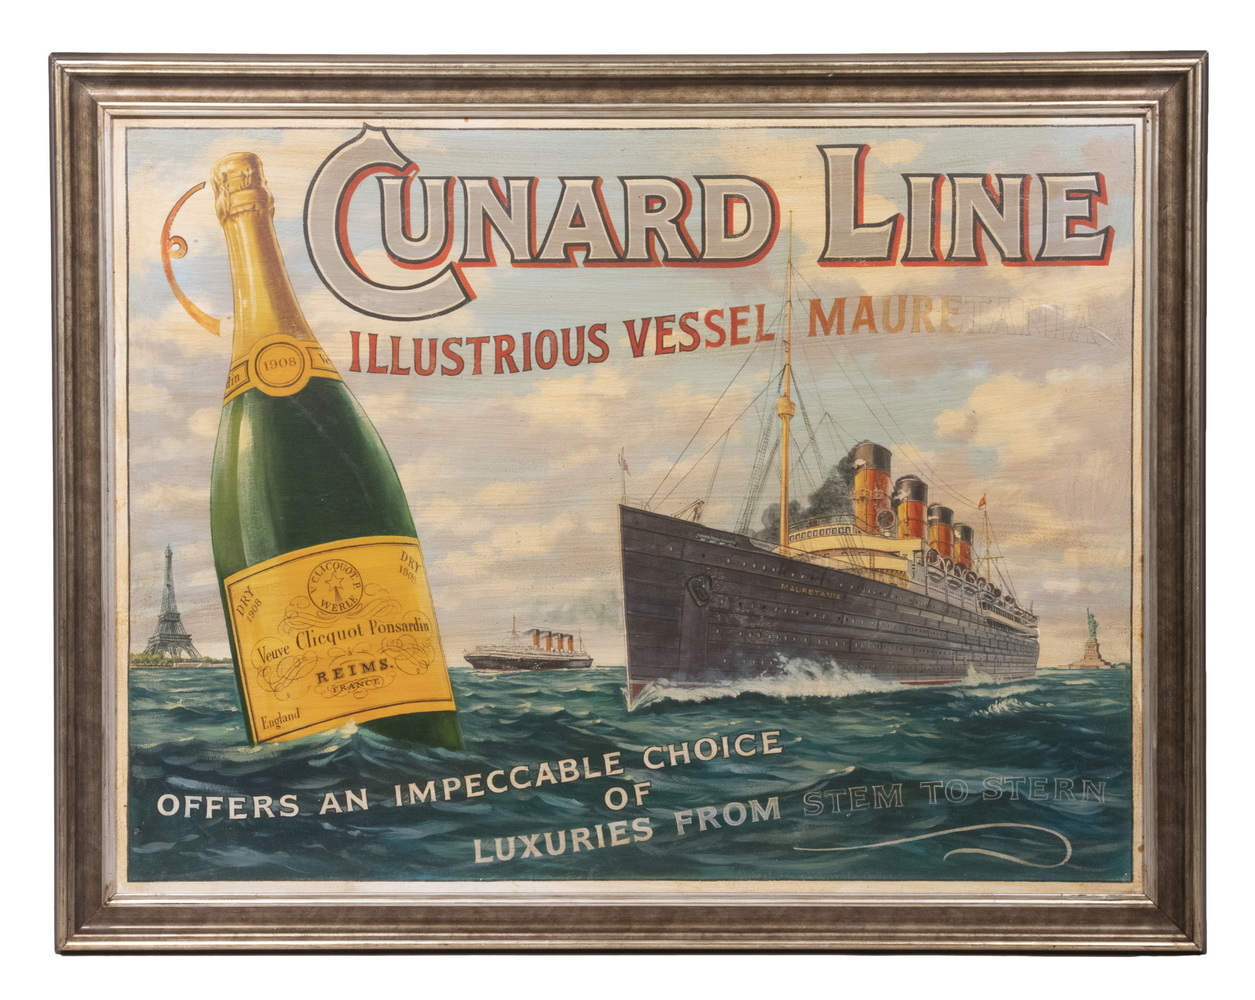 LARGE CHAMPAGNE ADVERTISEMENT WITH 2b296f